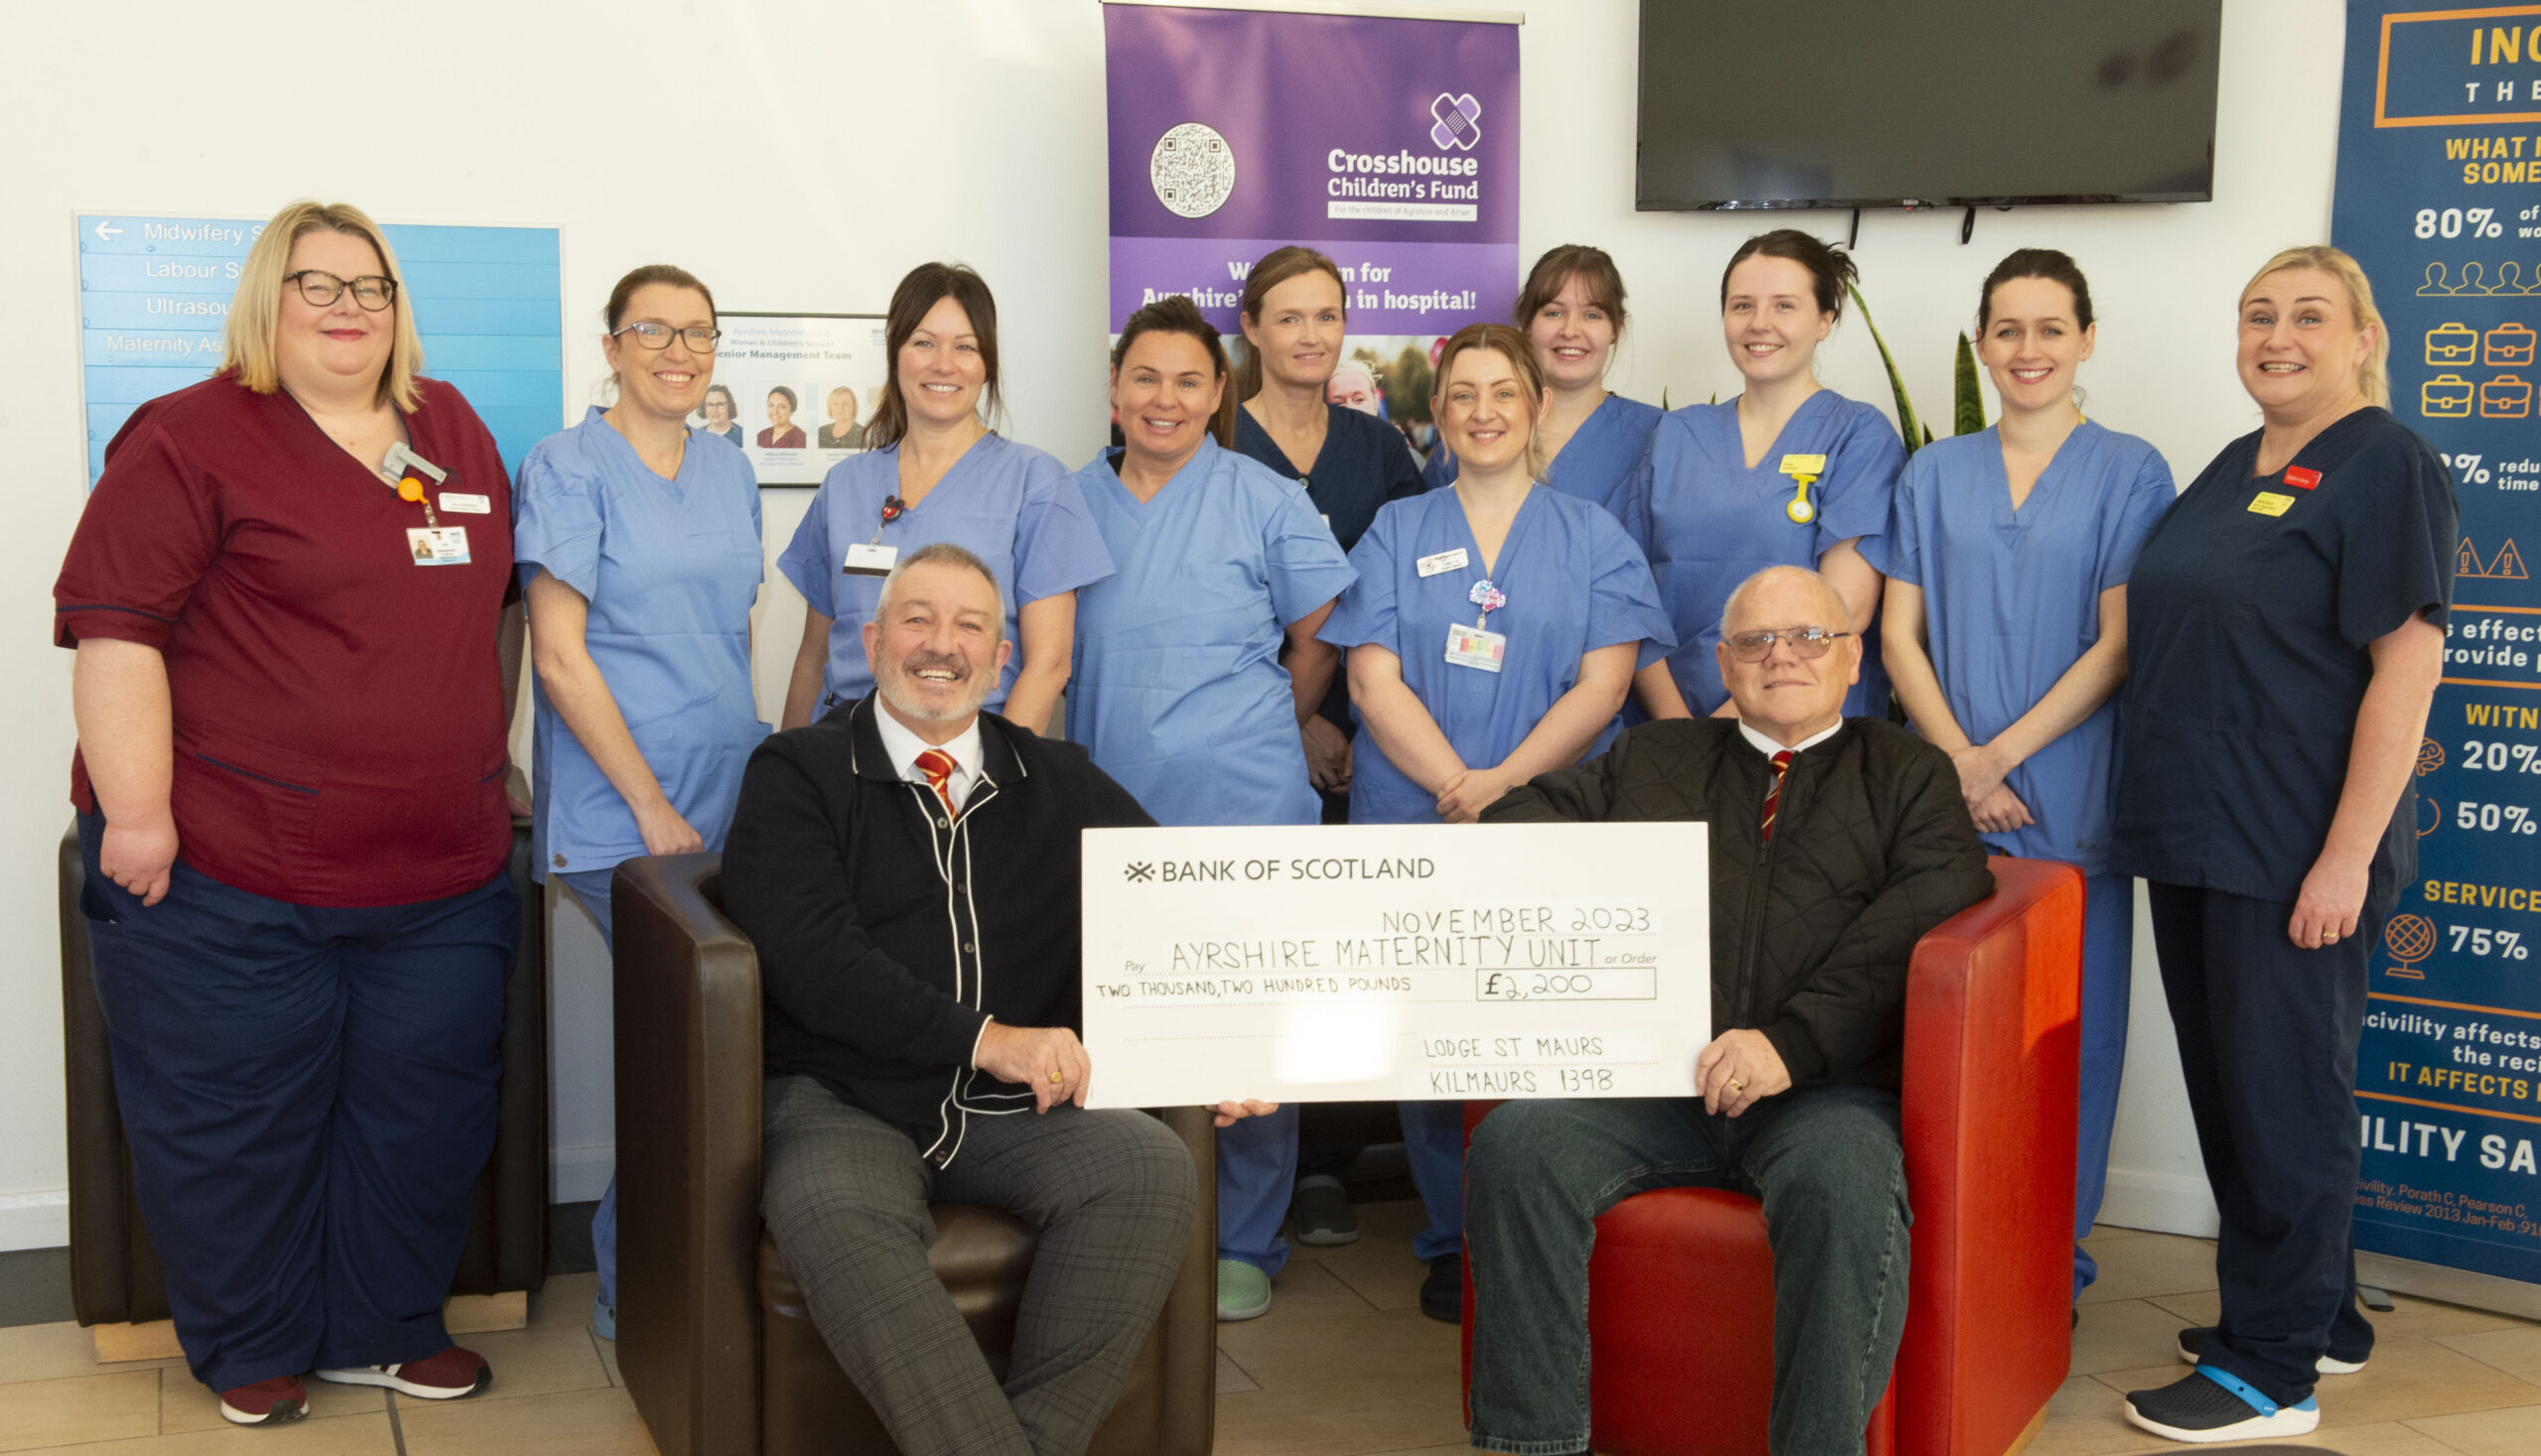 Ayrshire Maternity Unit Labour staff and representatives from Kilmaurs Masonic Lodge presenting cheque for £2,200